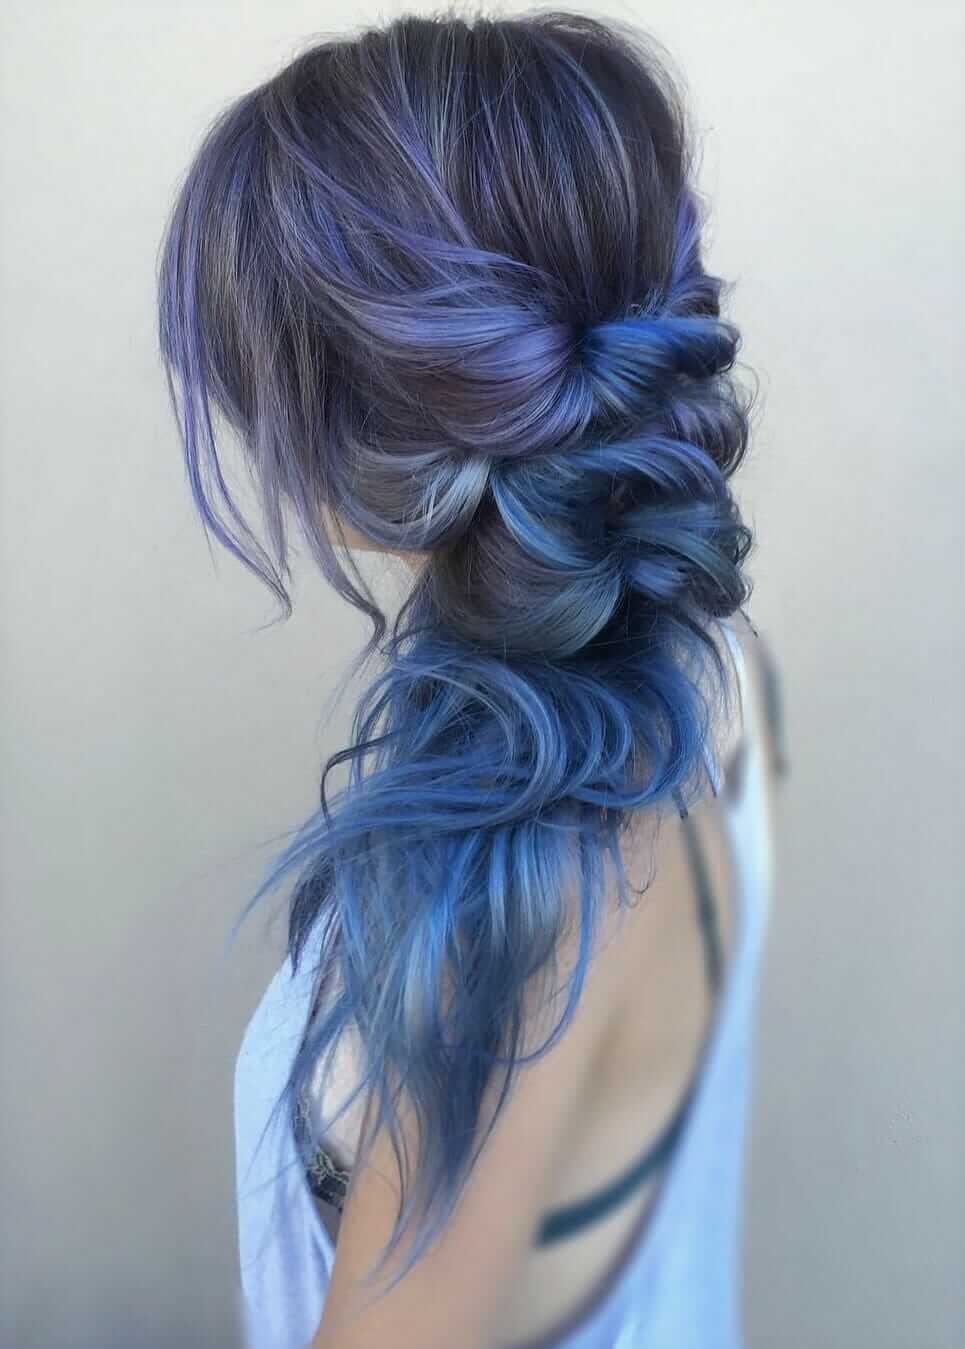 21 Blue Hair ideas that you'll love Page 6 of 21 Ninja